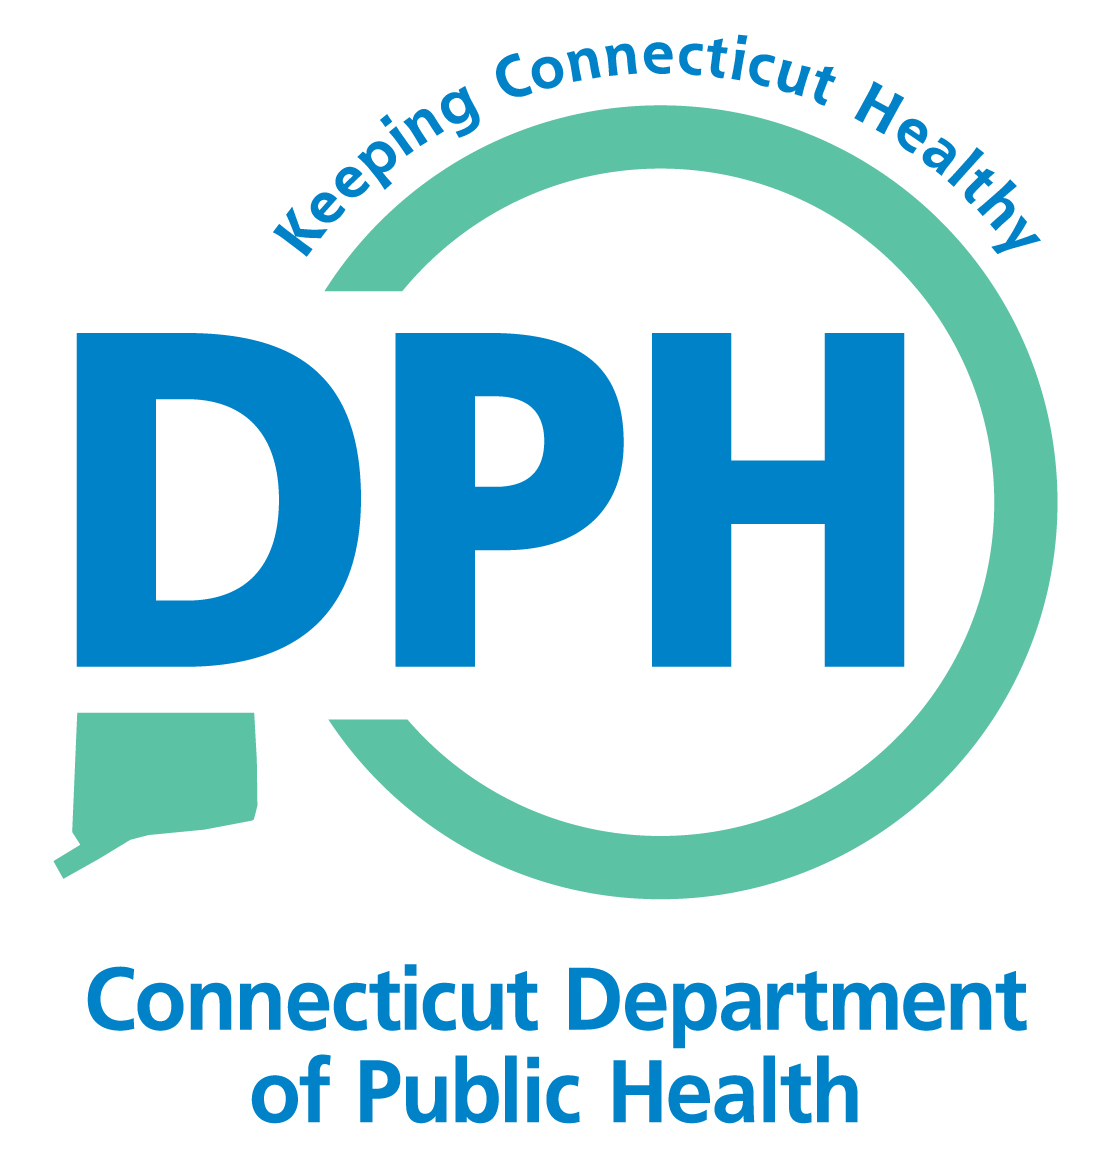 Connecticut Department of Health - Keeping Connecticut Healthy